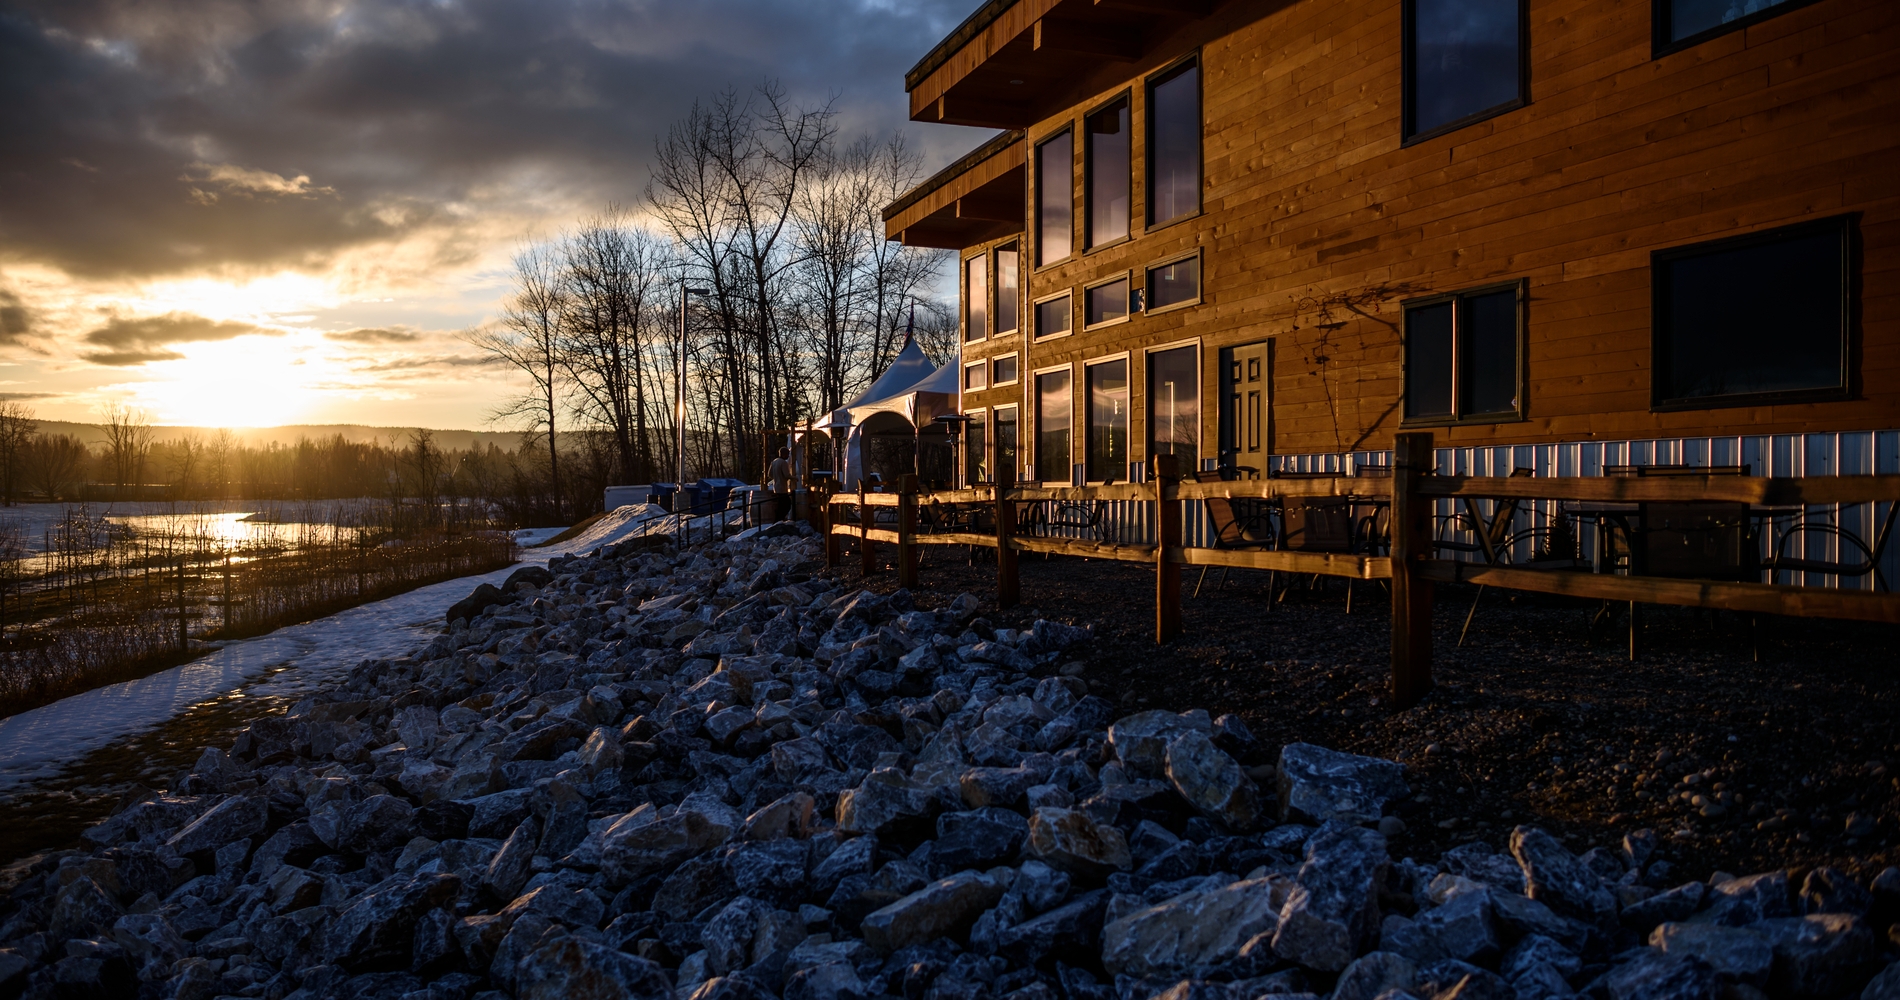 A wooden building sits on top of a rocky shore beside a river as the sun sets.